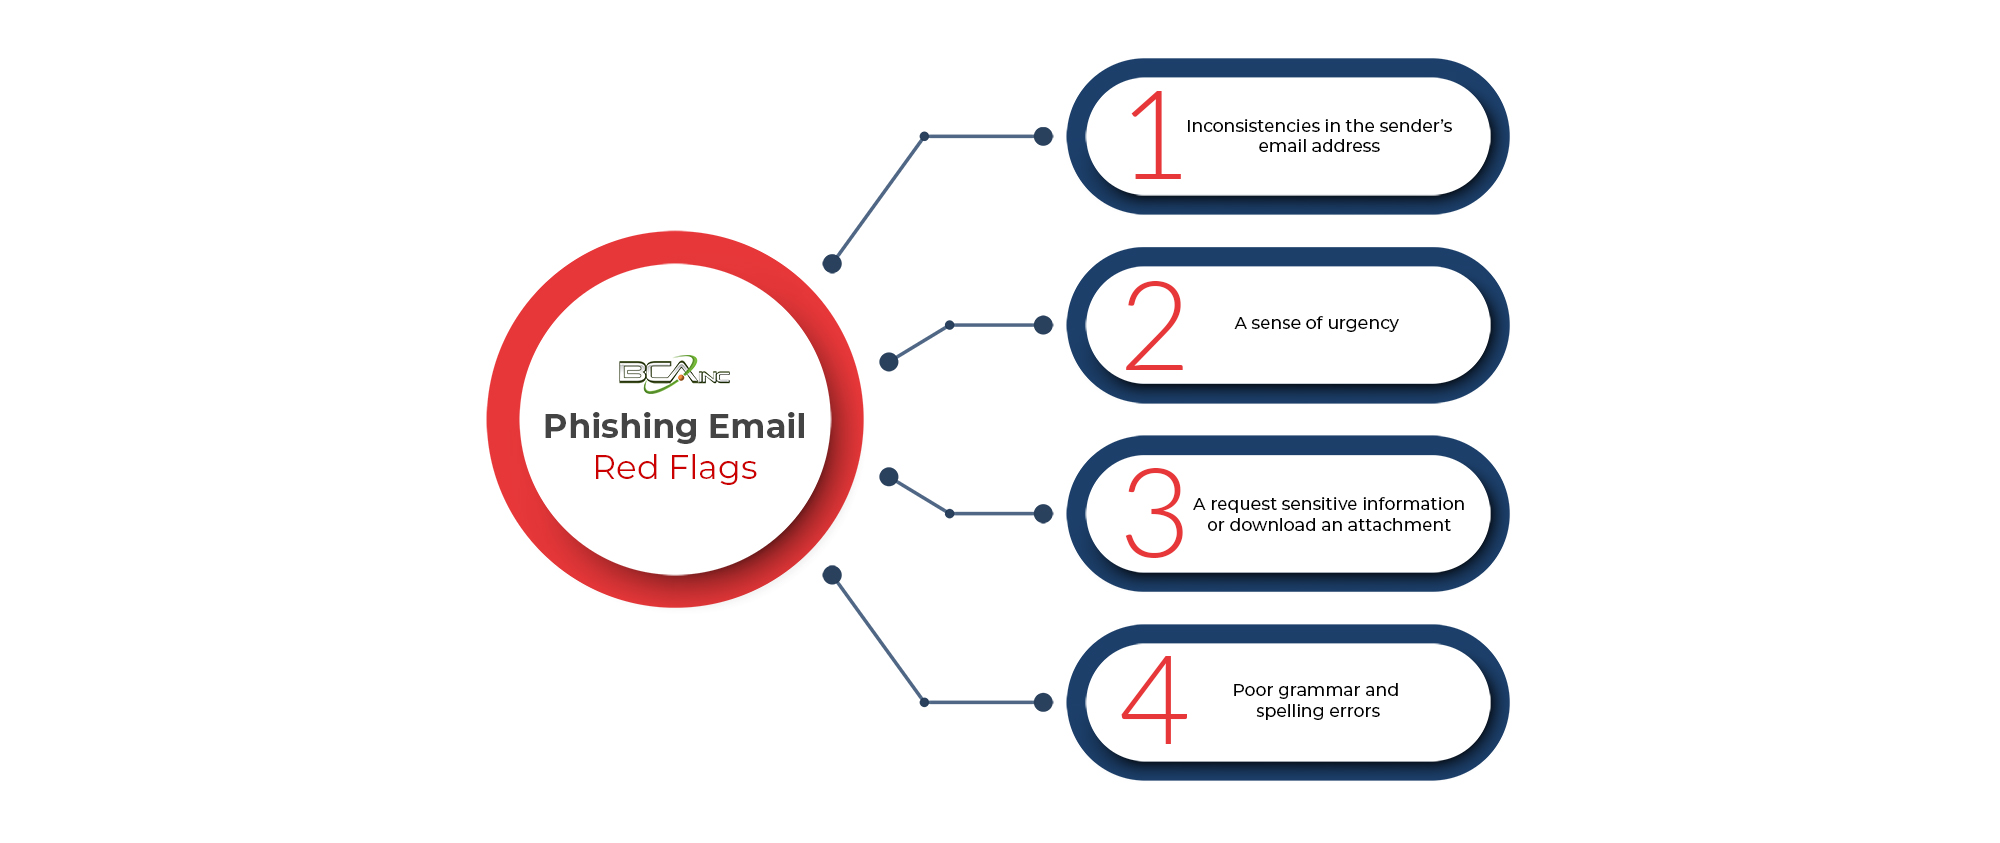 Phishing Email Red Flags